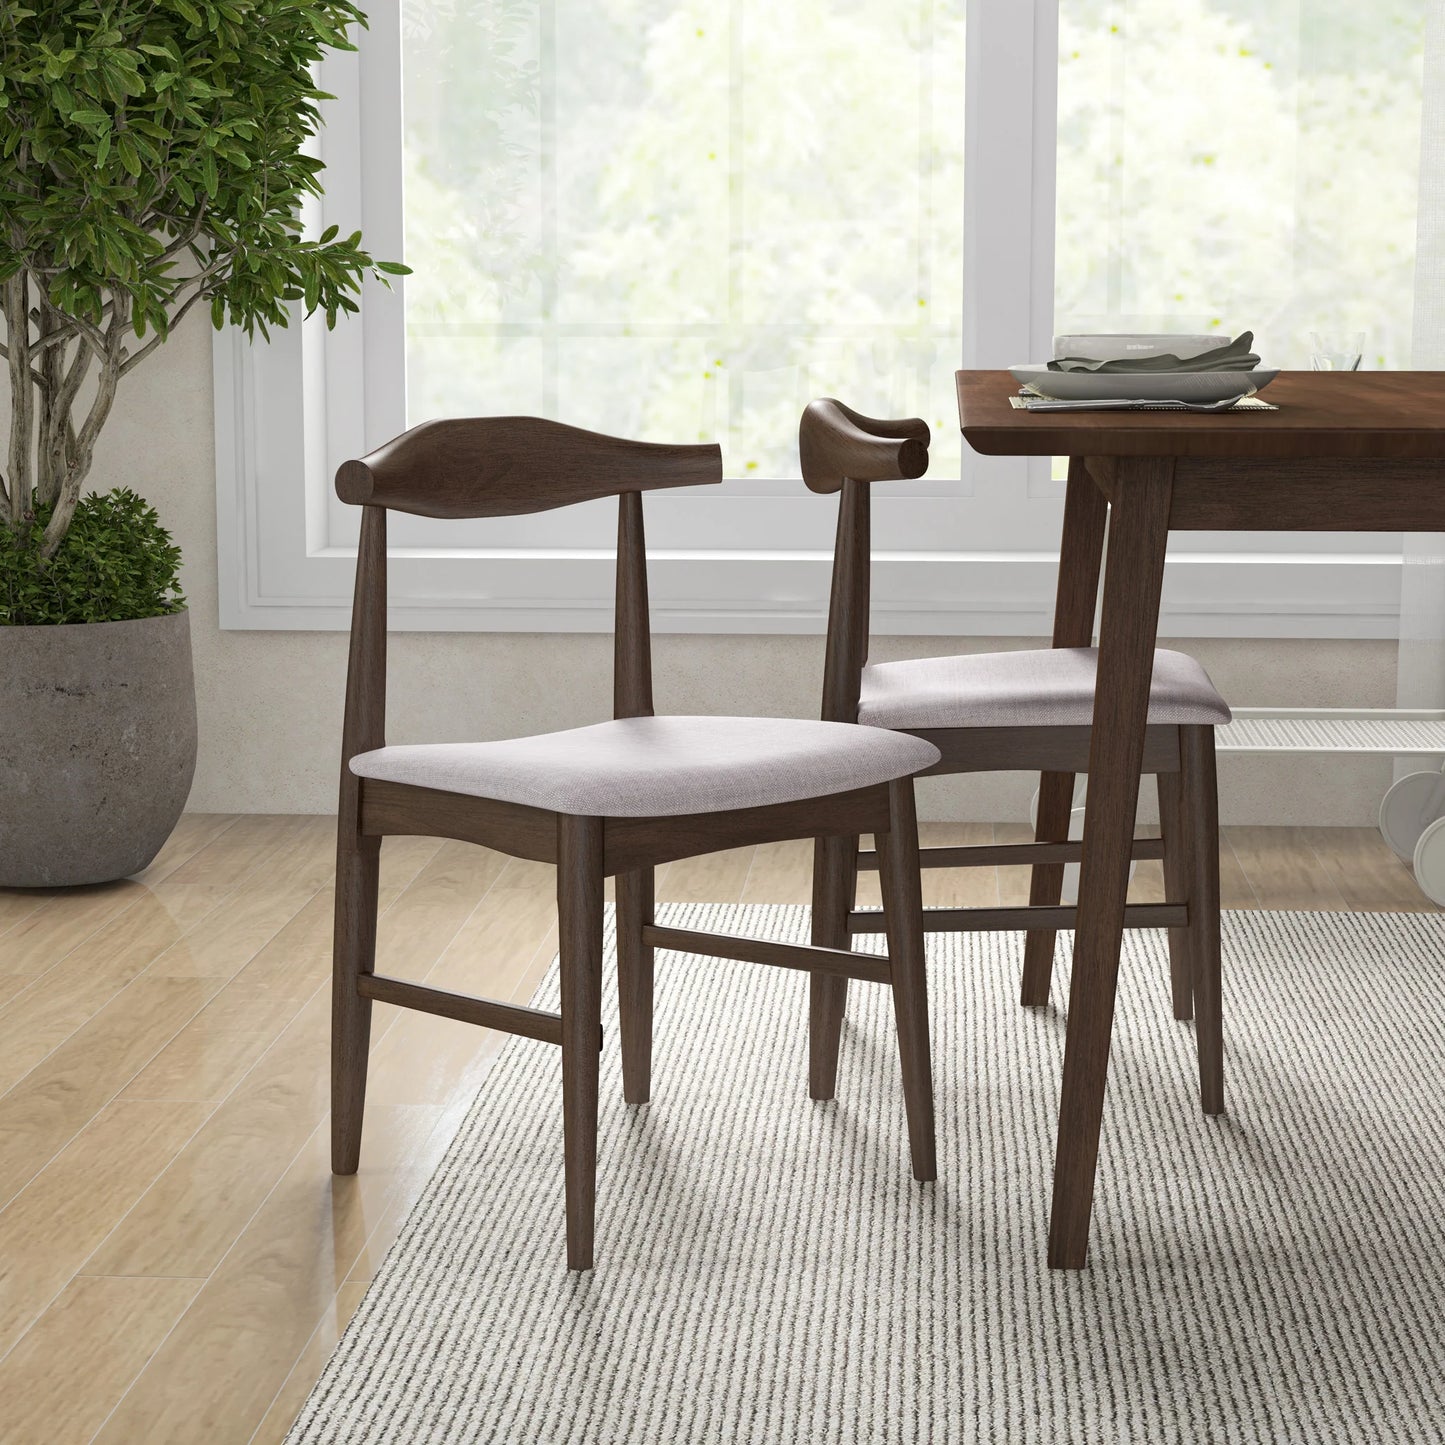 Adira (Small - Walnut) Dining Set with 4 Winston (Beige) Dining Chairs